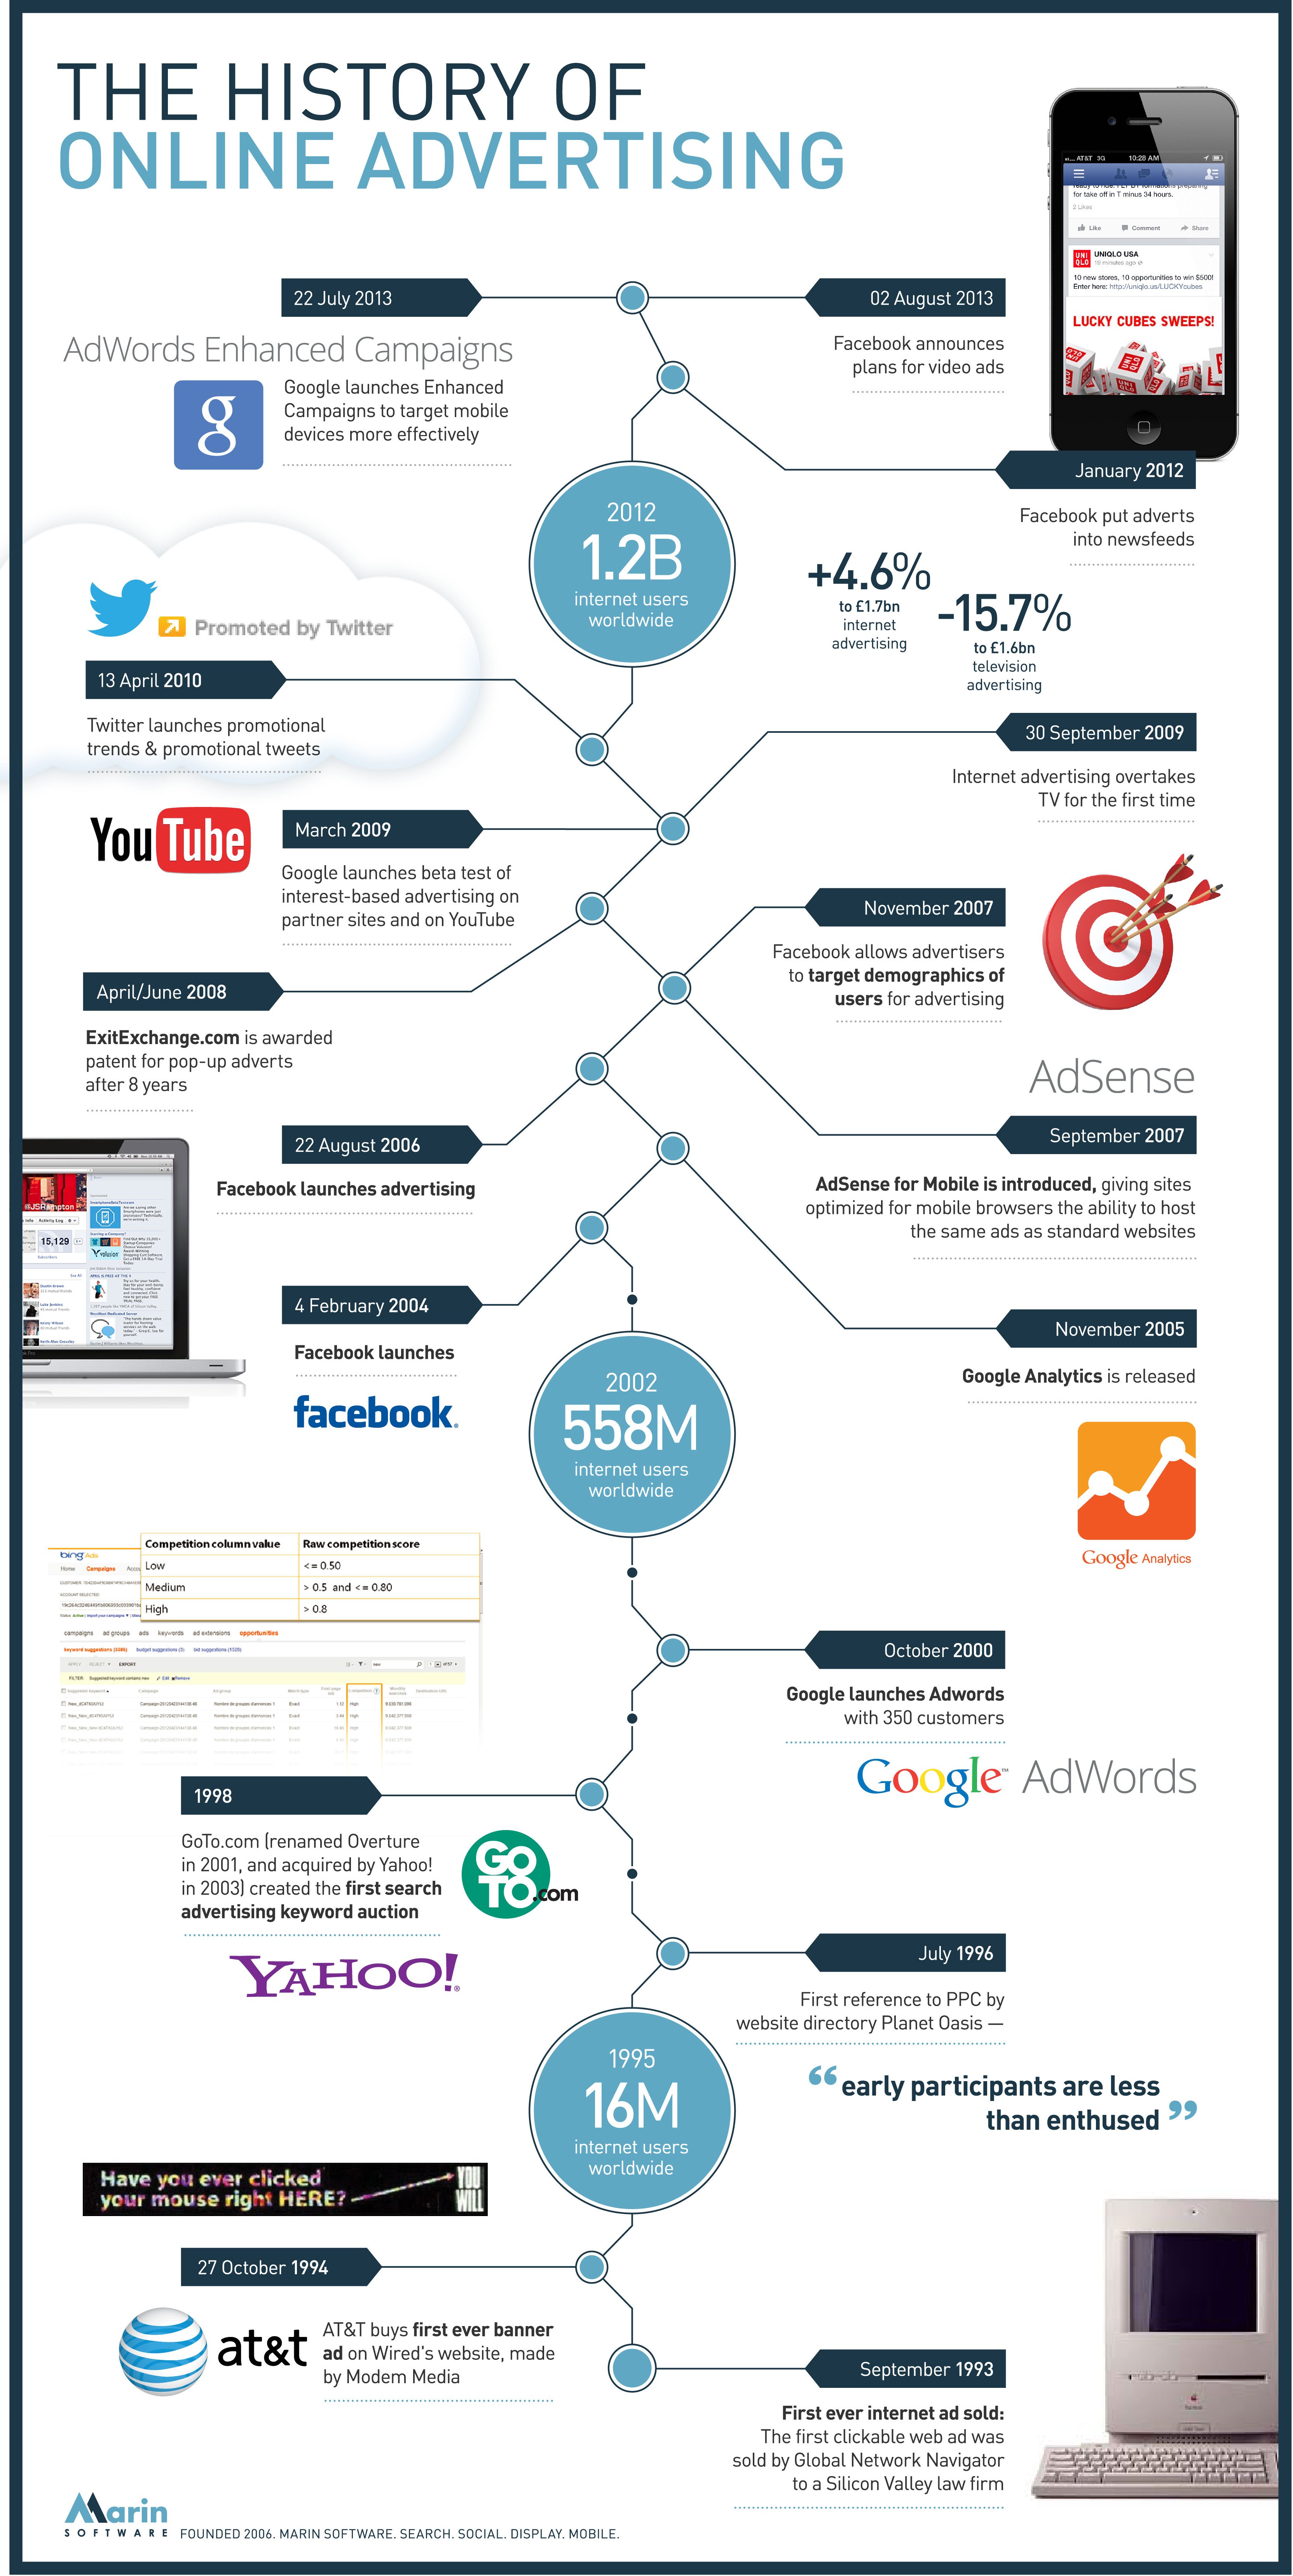 history, online advertising, marin software, ppc, sem, infographic